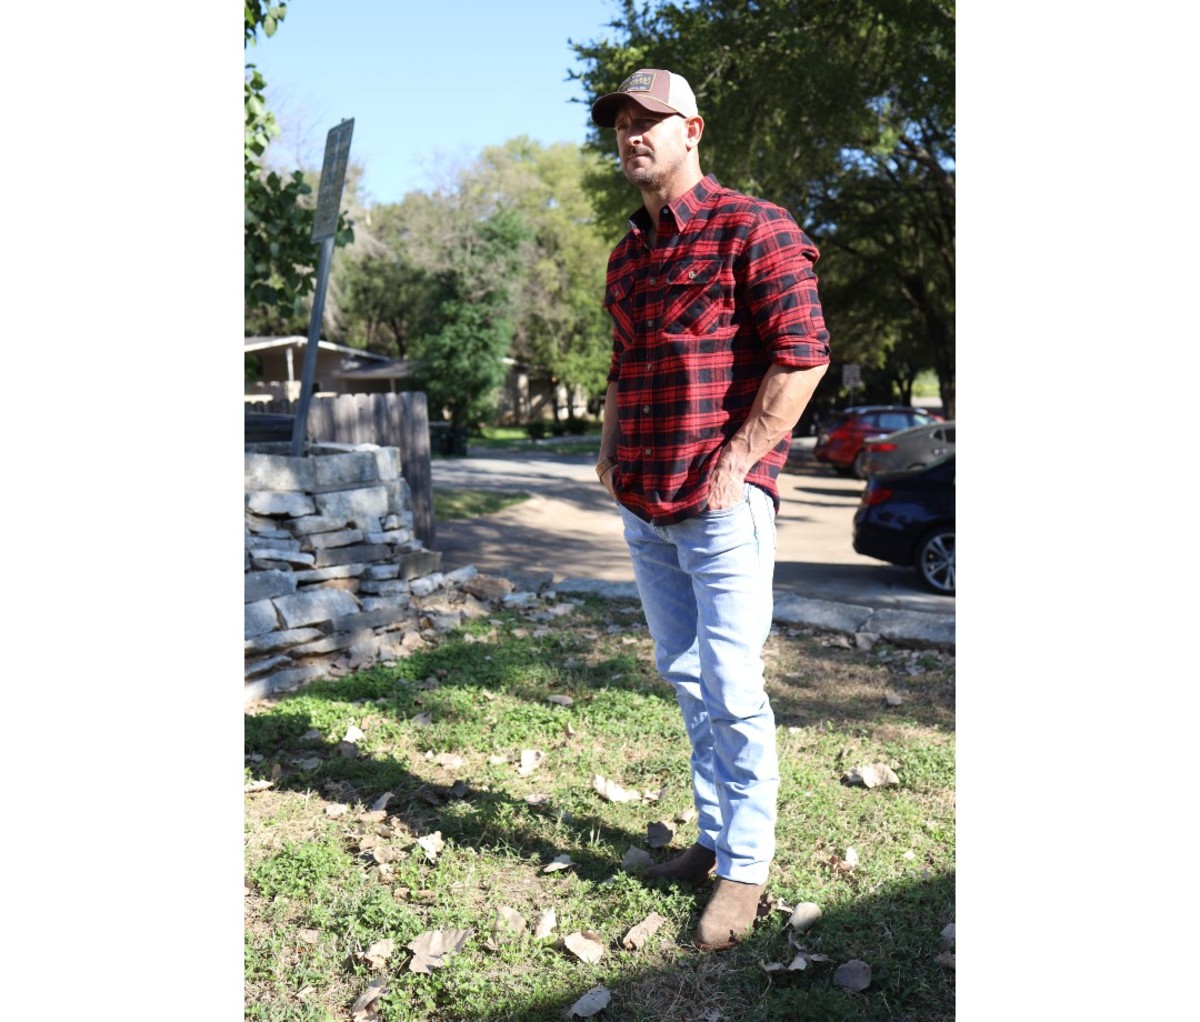 Man in red flannel shirt, light blue jeans, suede boots, and baseball hat standing on grass